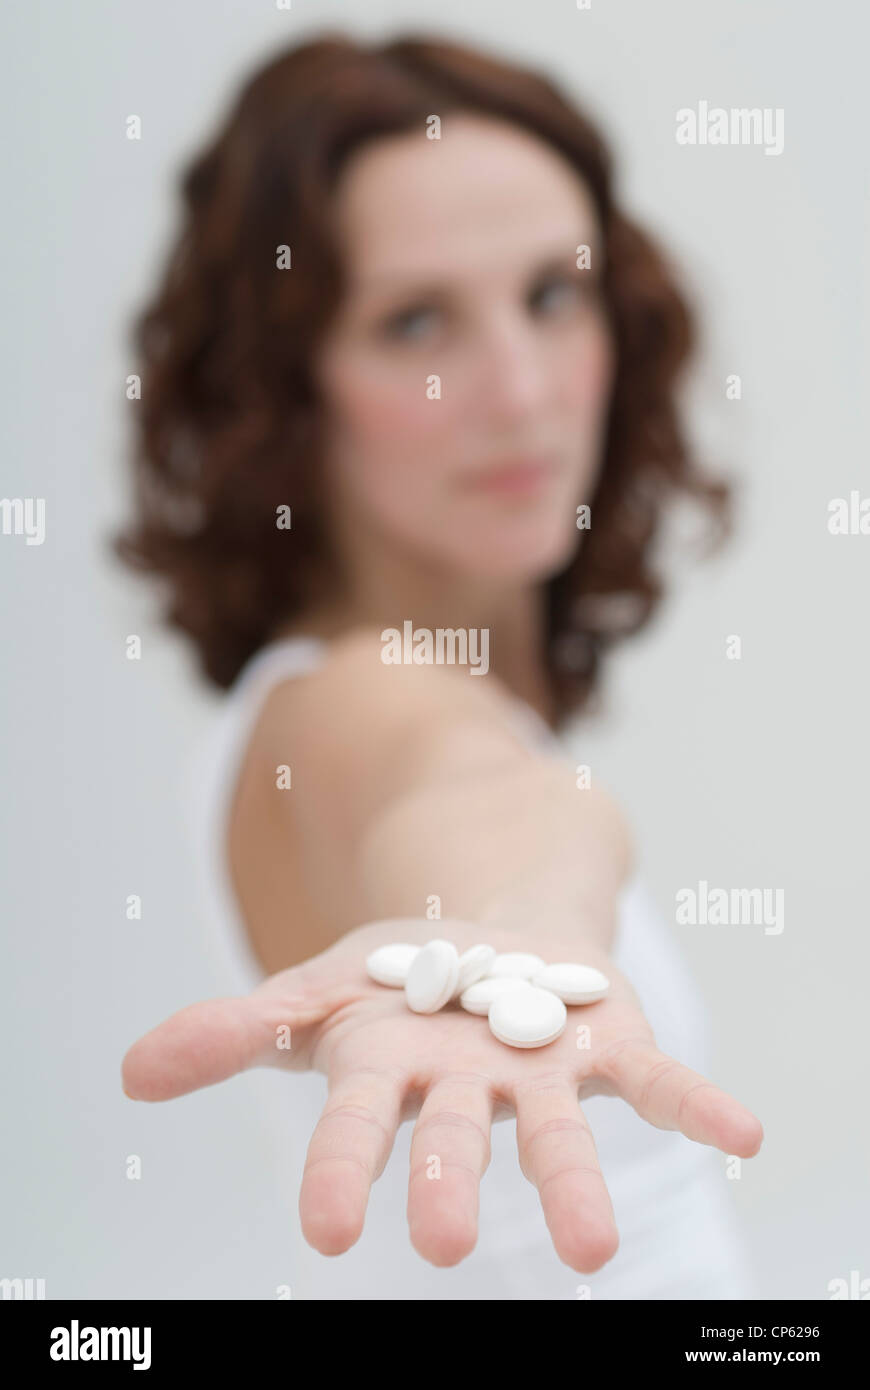 Mid adult woman showing white pills in hand Stock Photo